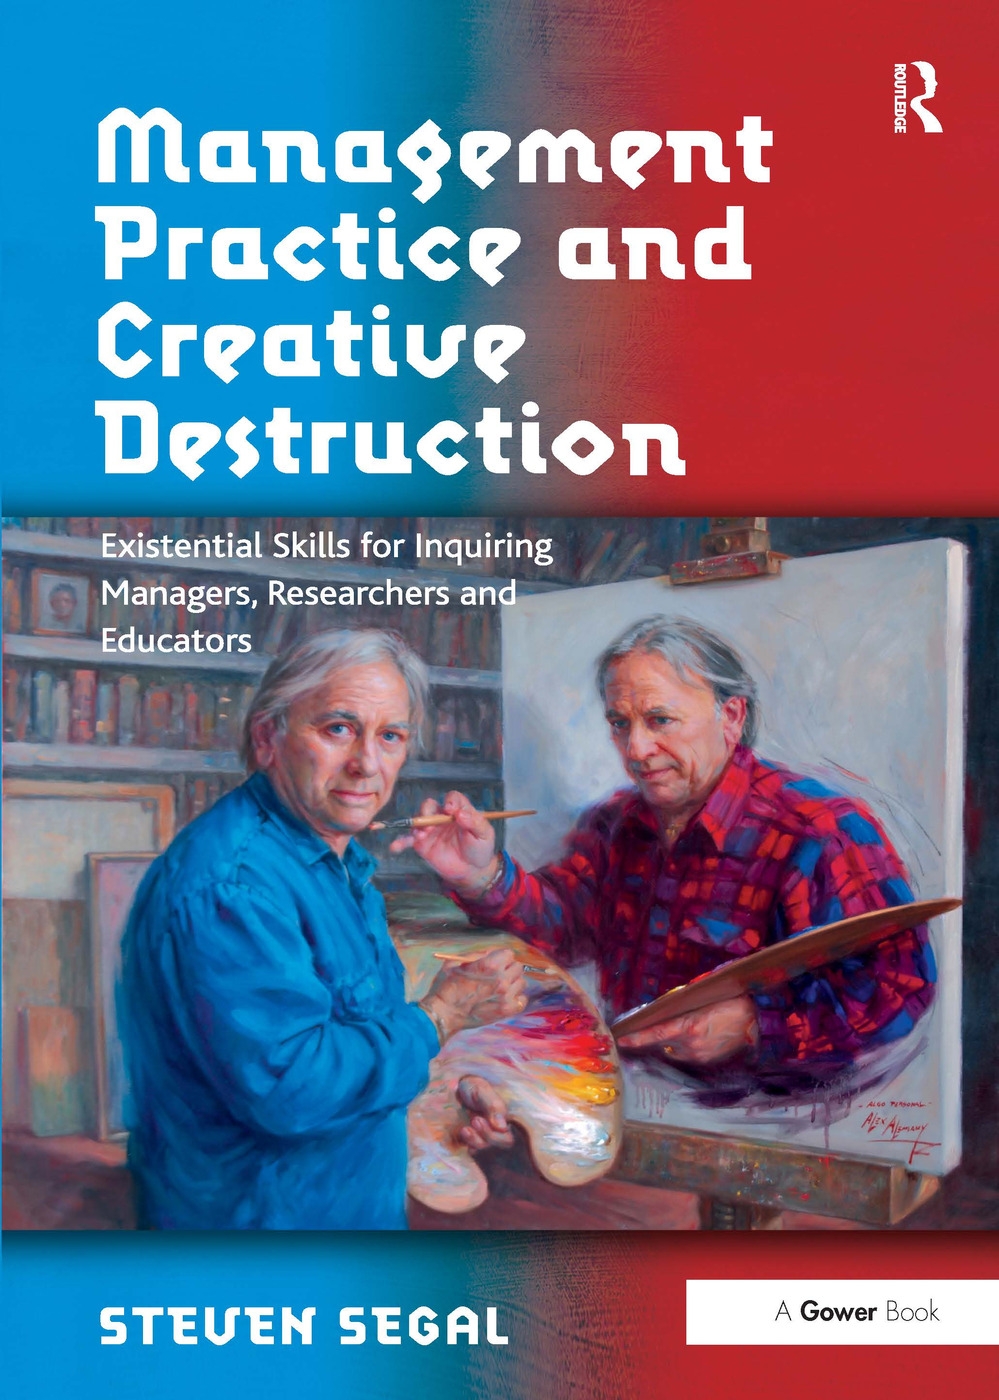 Management Practice and Creative Destruction: Existential Skills for Inquiring Managers, Researchers and Educators